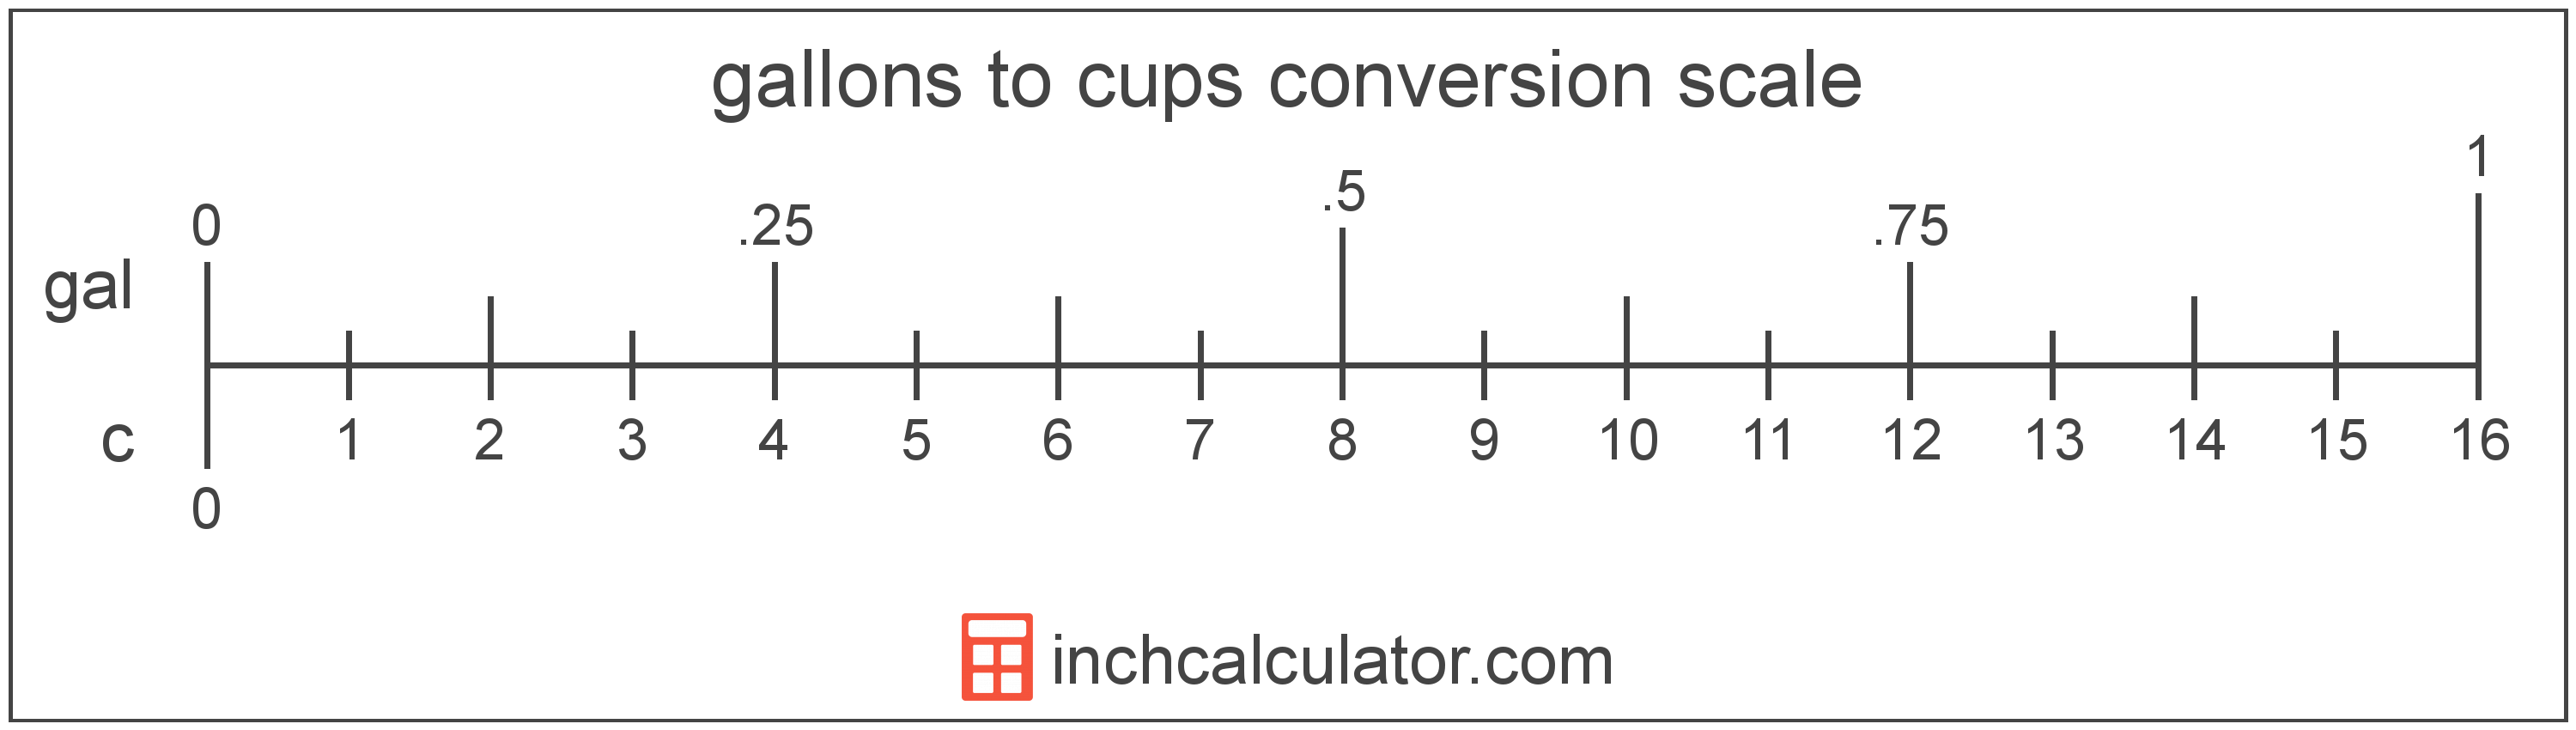 Cups In A Gallon Chart